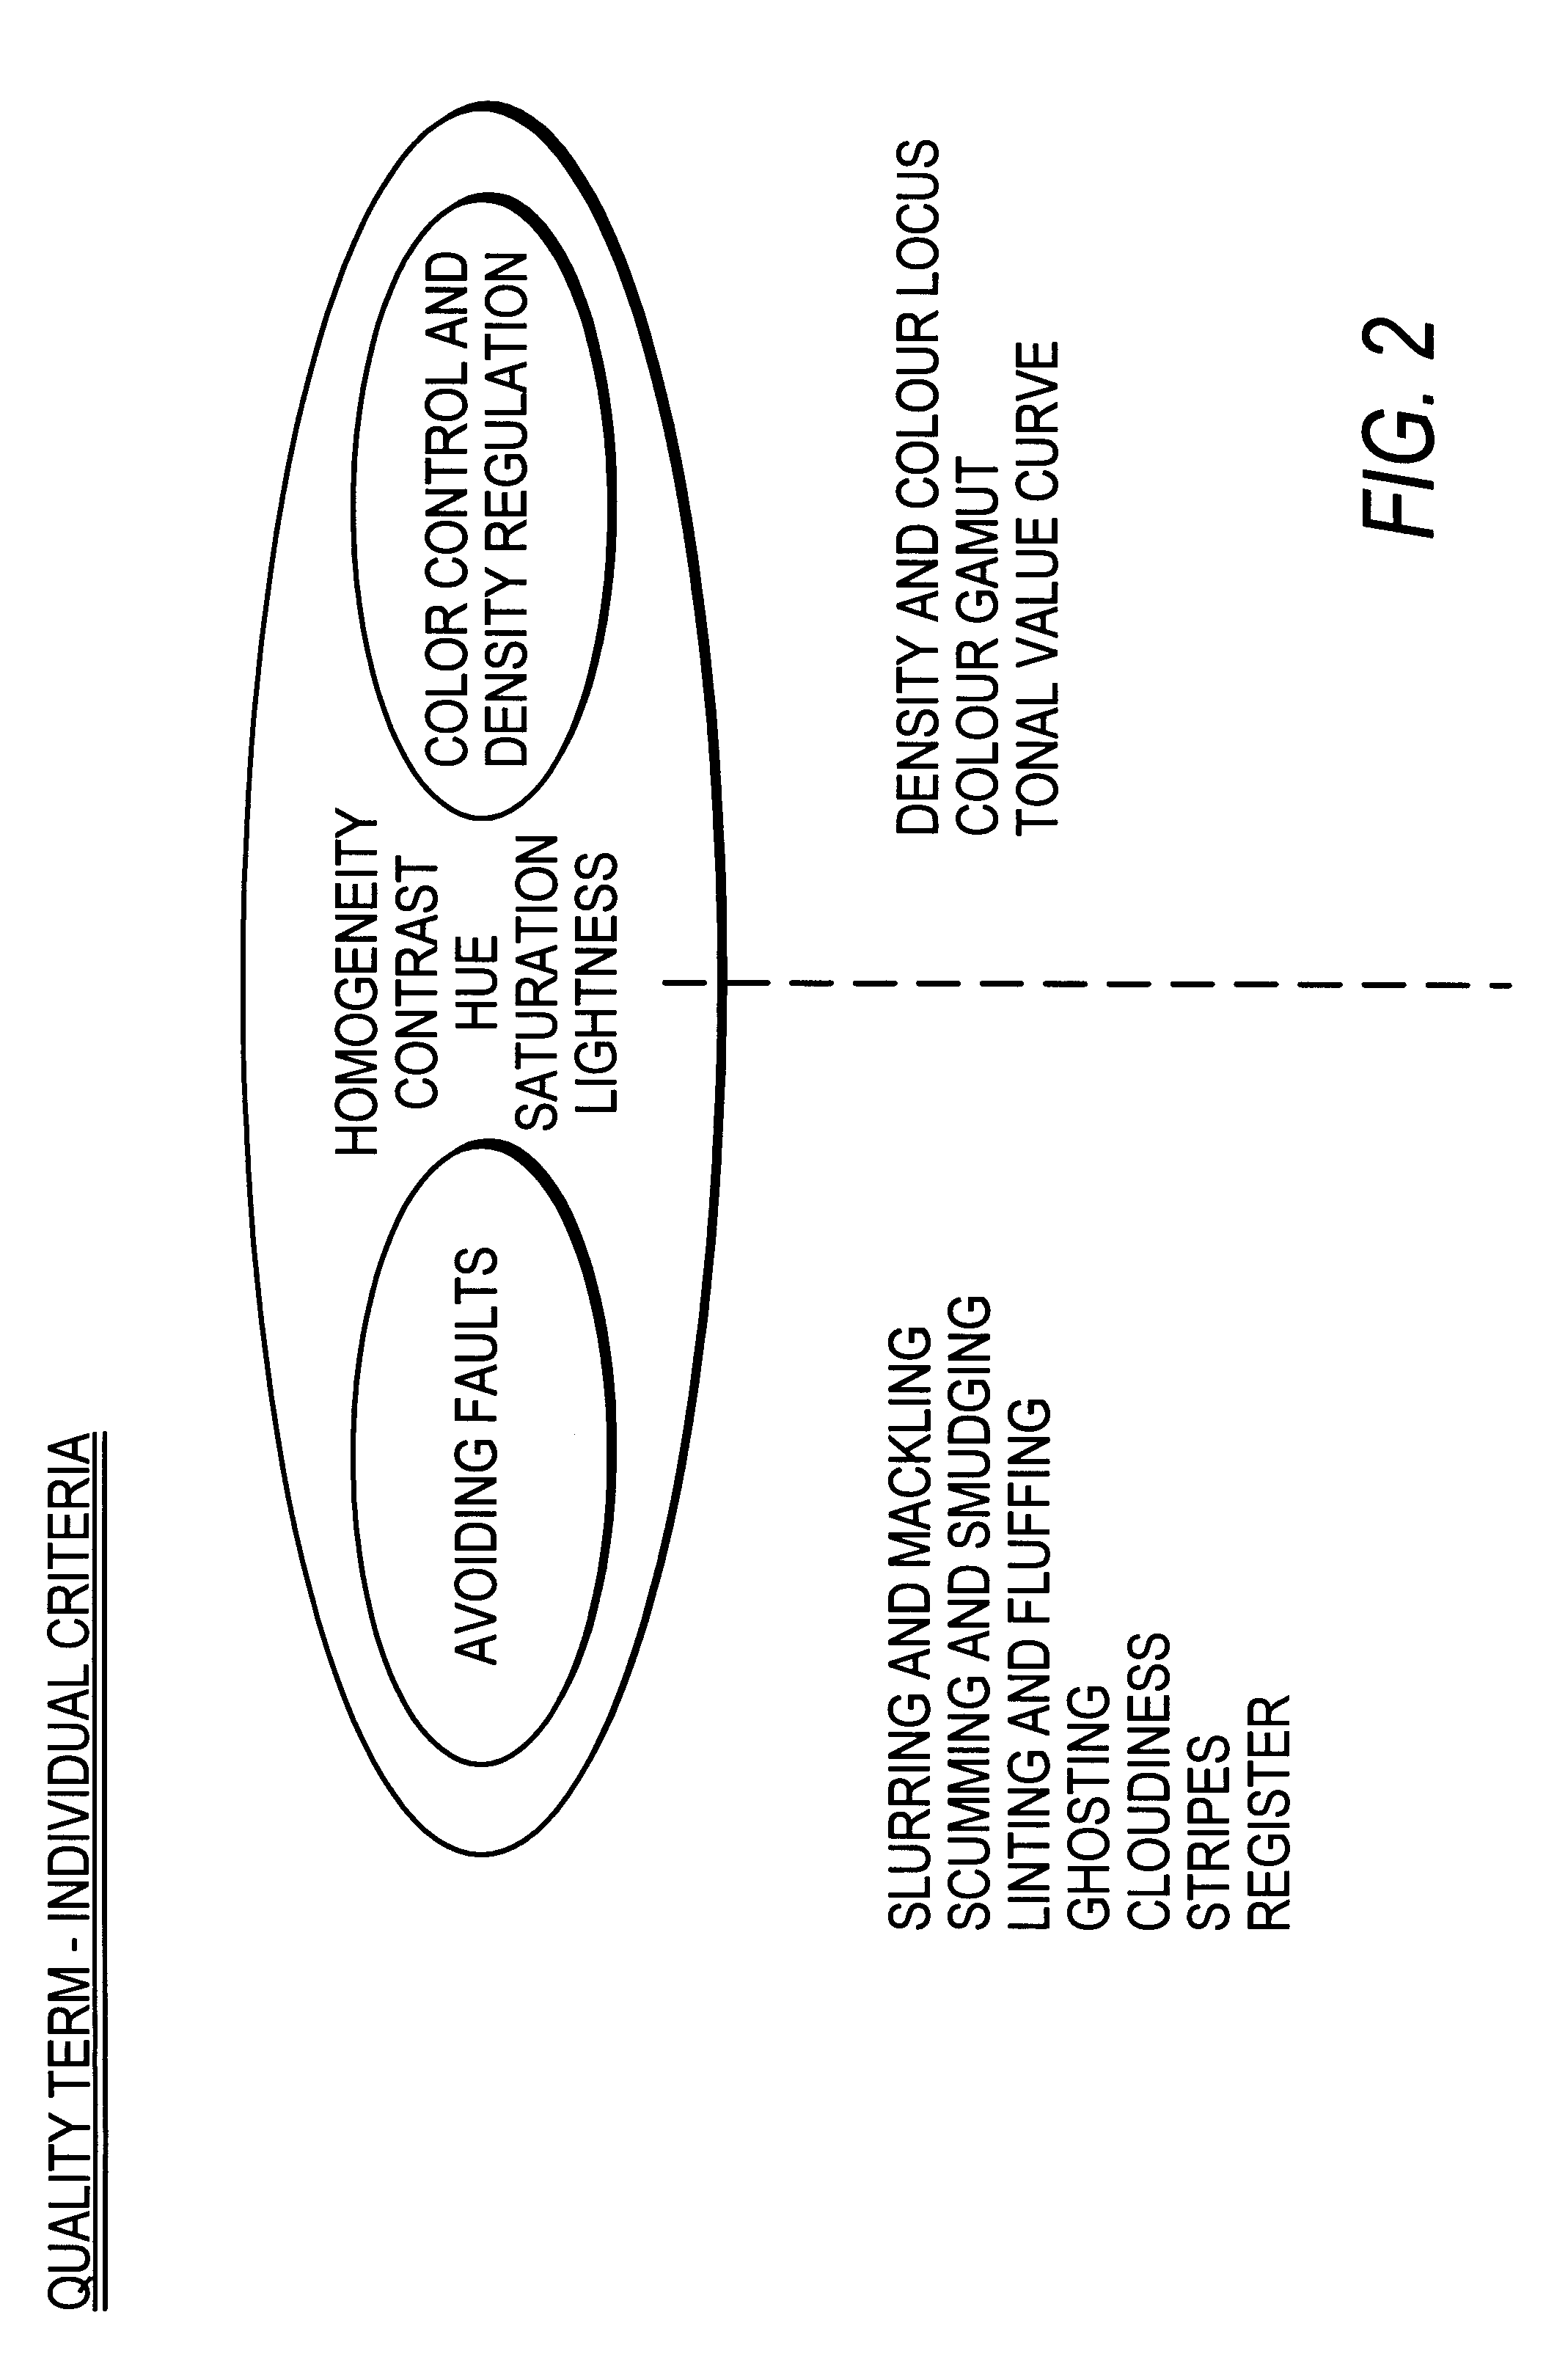 Image data-oriented printing machine and method of operating the same